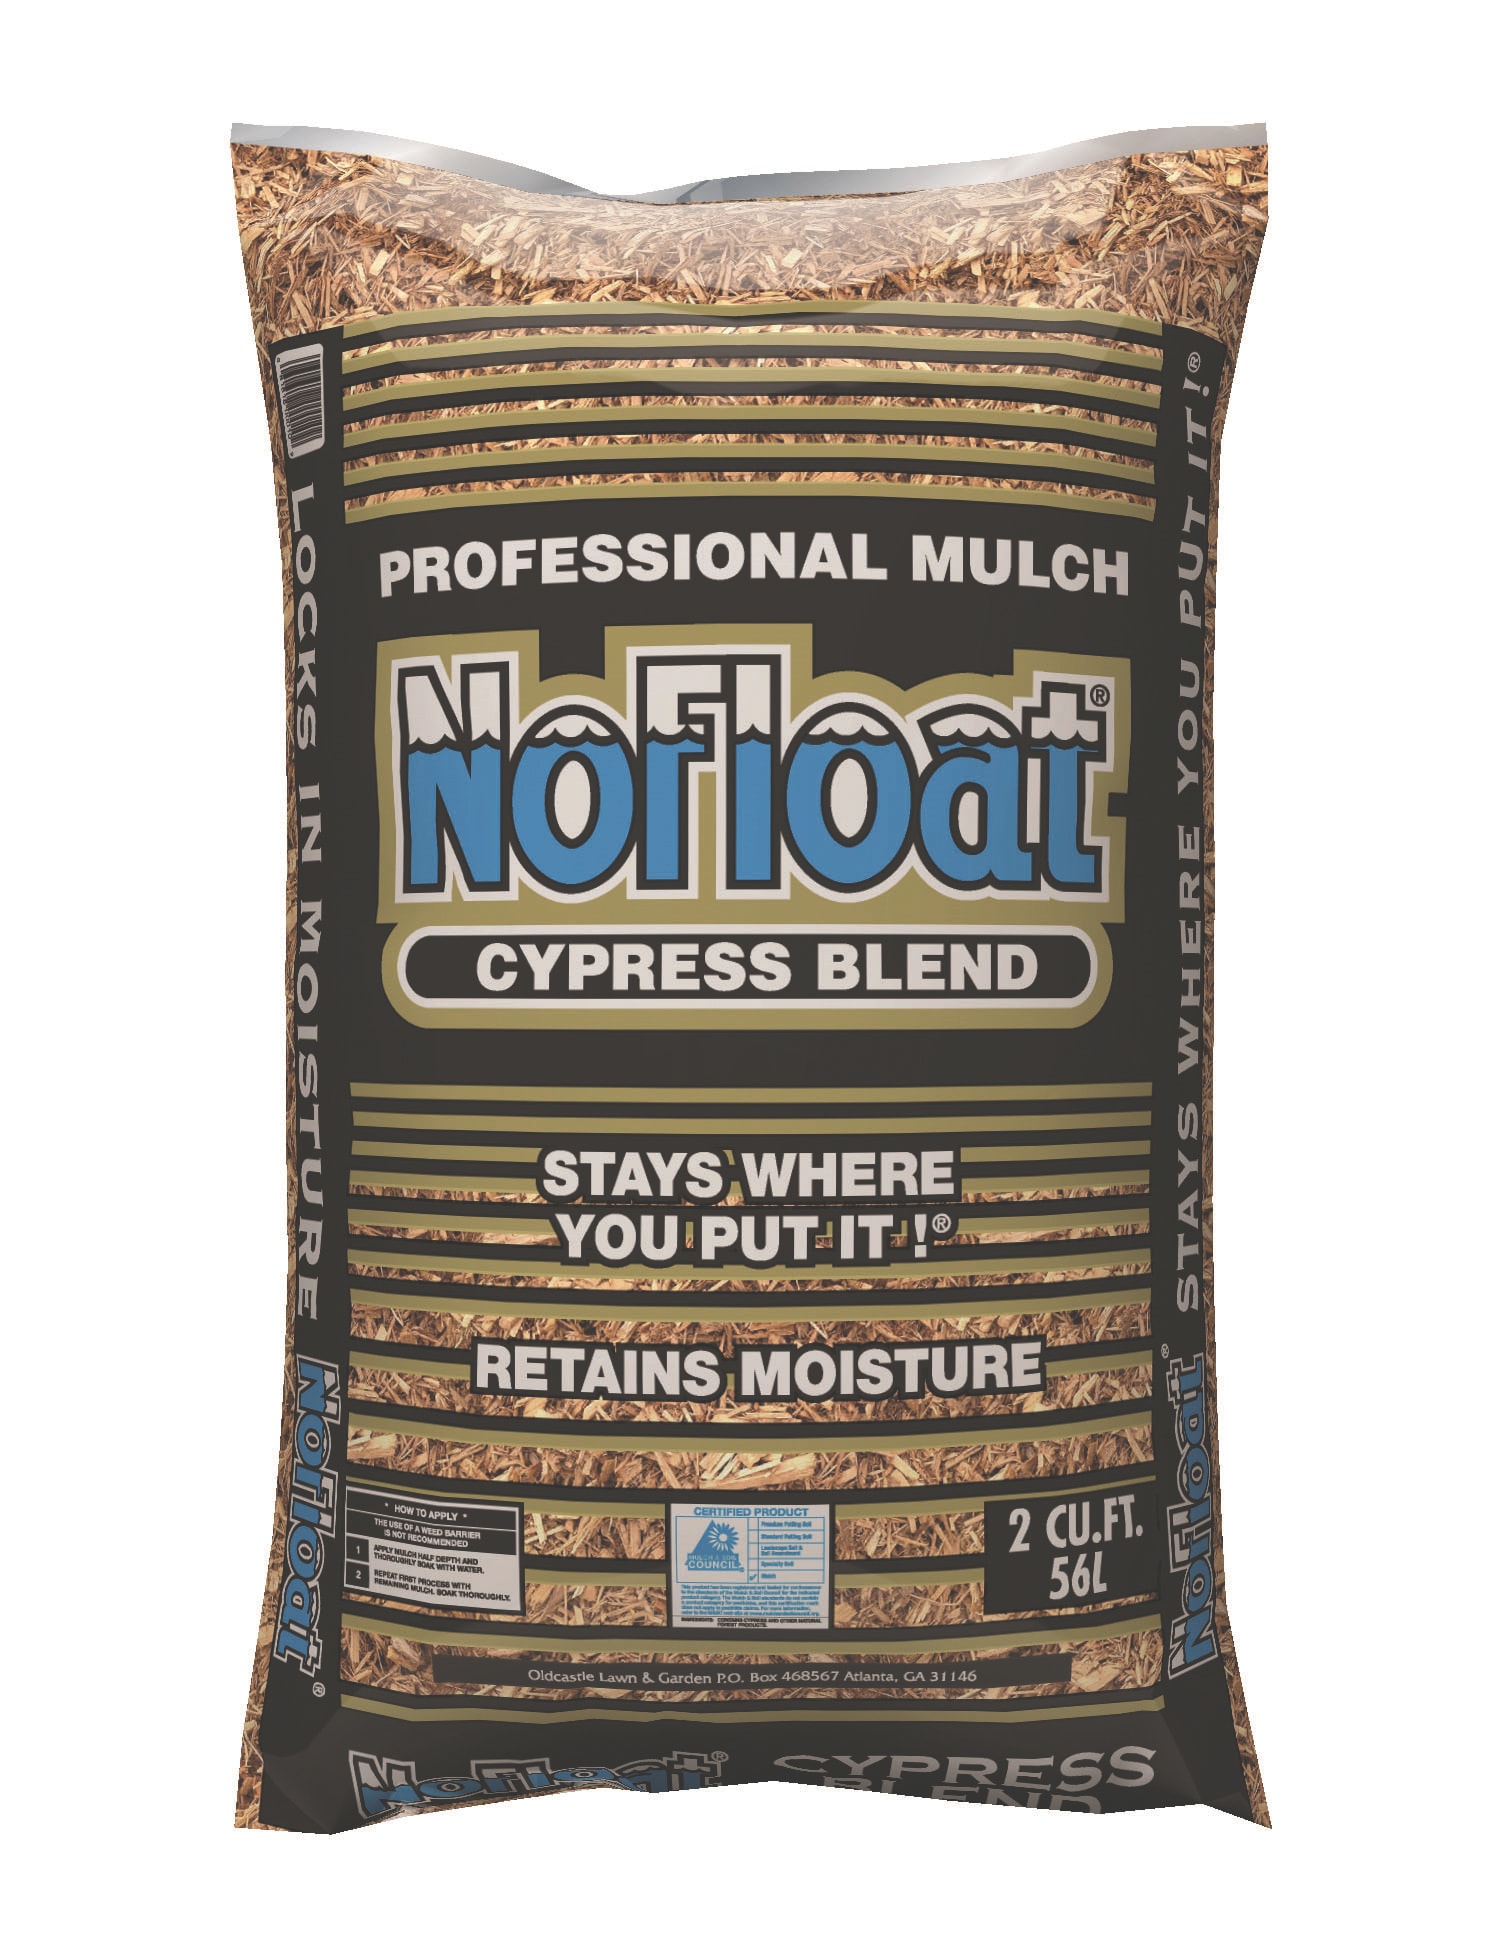 Preen 2-cu ft Black Mulch Plus Weed Control in the Bagged Mulch department  at Lowes.com